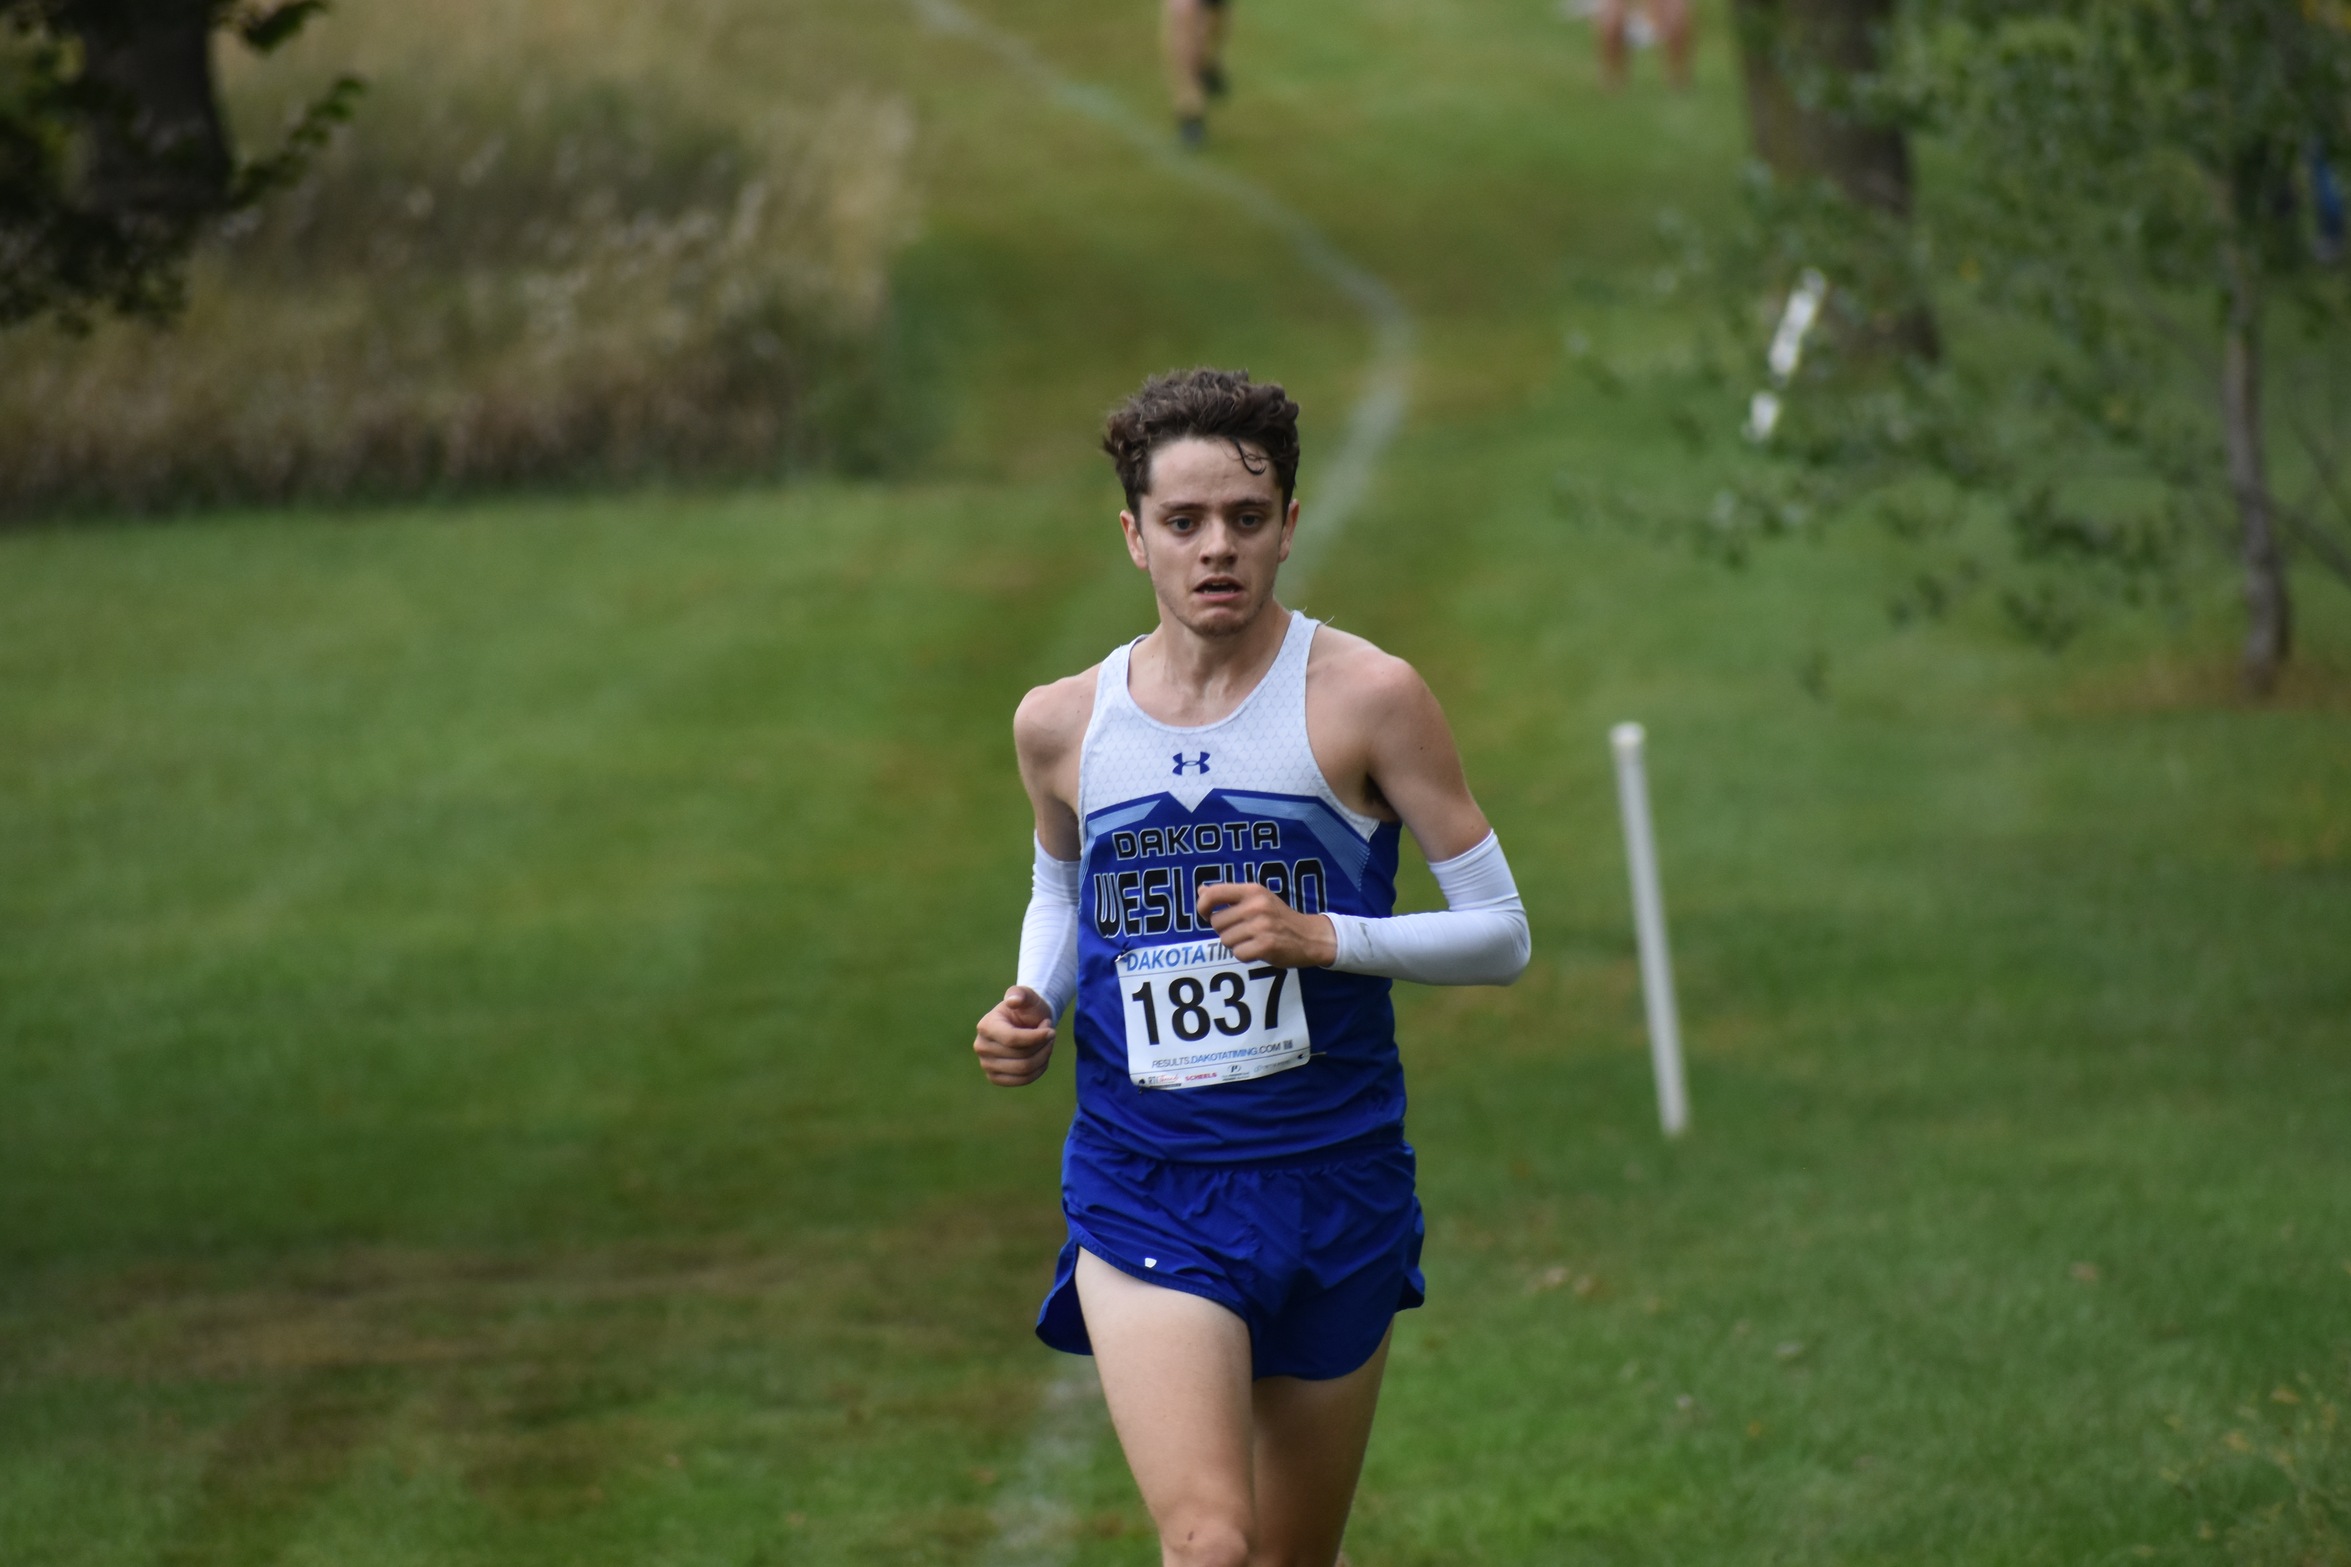 TIGERS CROSS COUNTRY BATTLE IN BLAZING TIGER CLASSIC